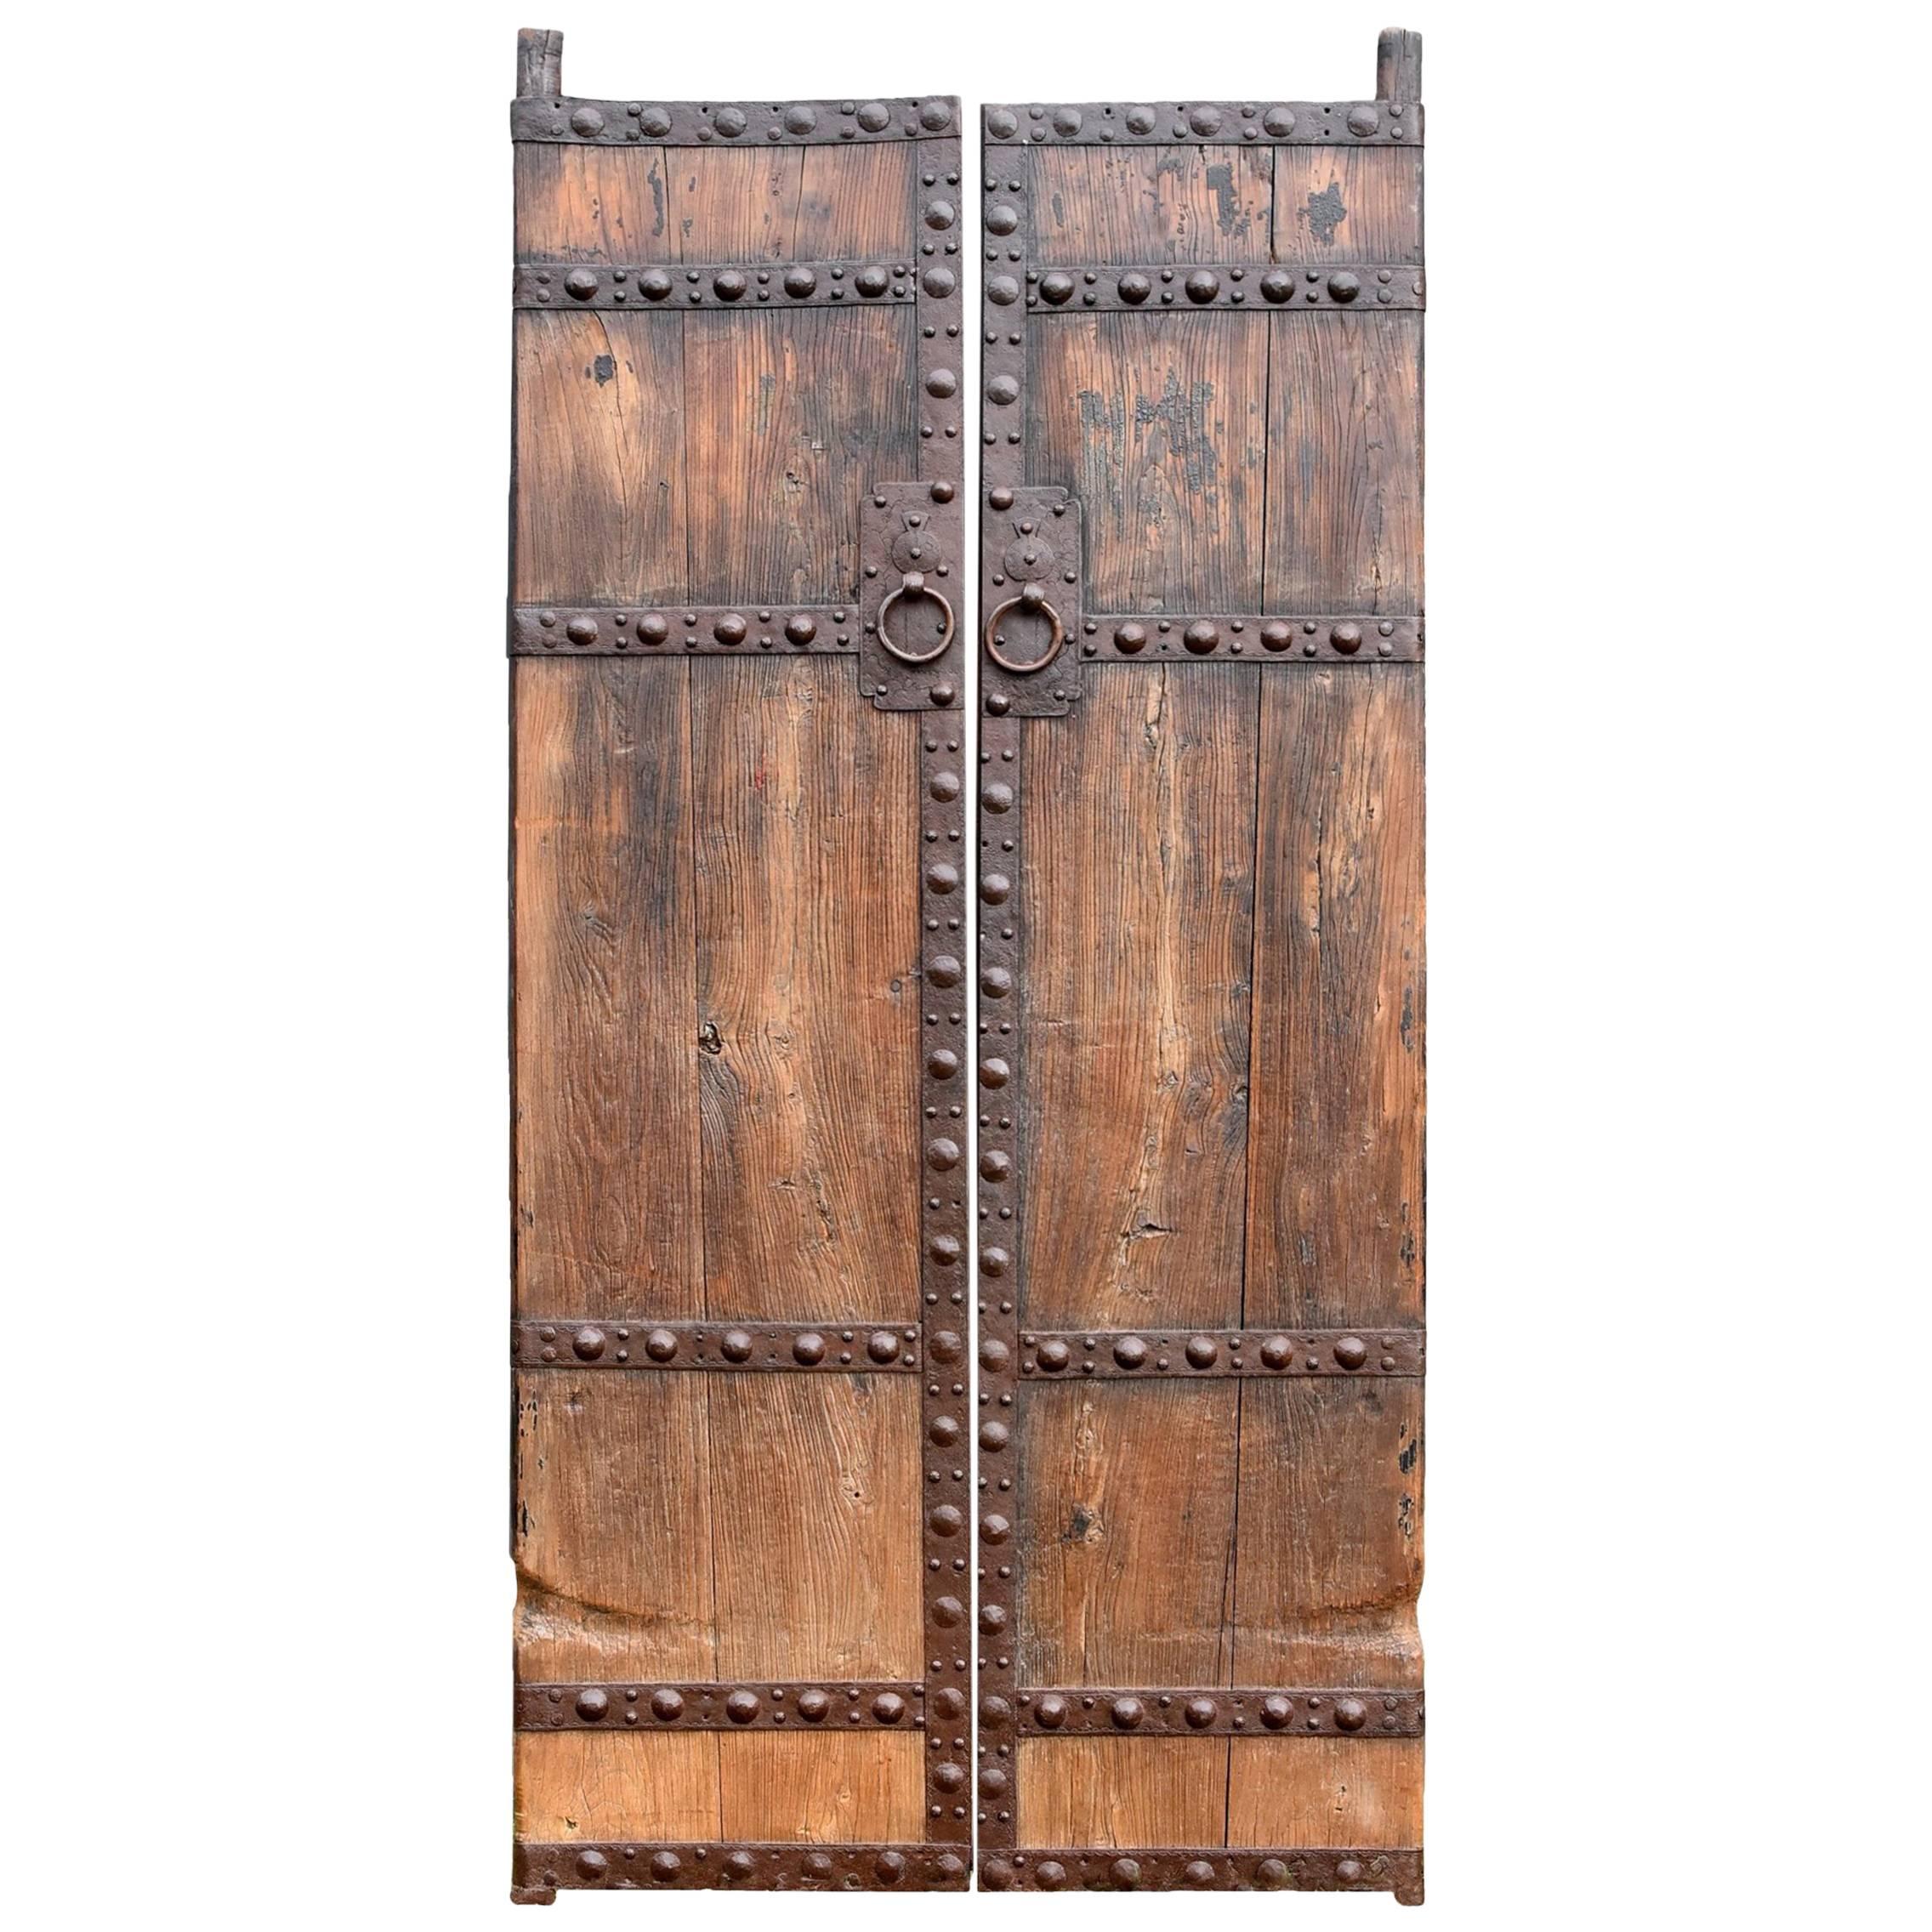 Antique Wooden Doors with Ironwork, Substantial, Chinese Rustic 